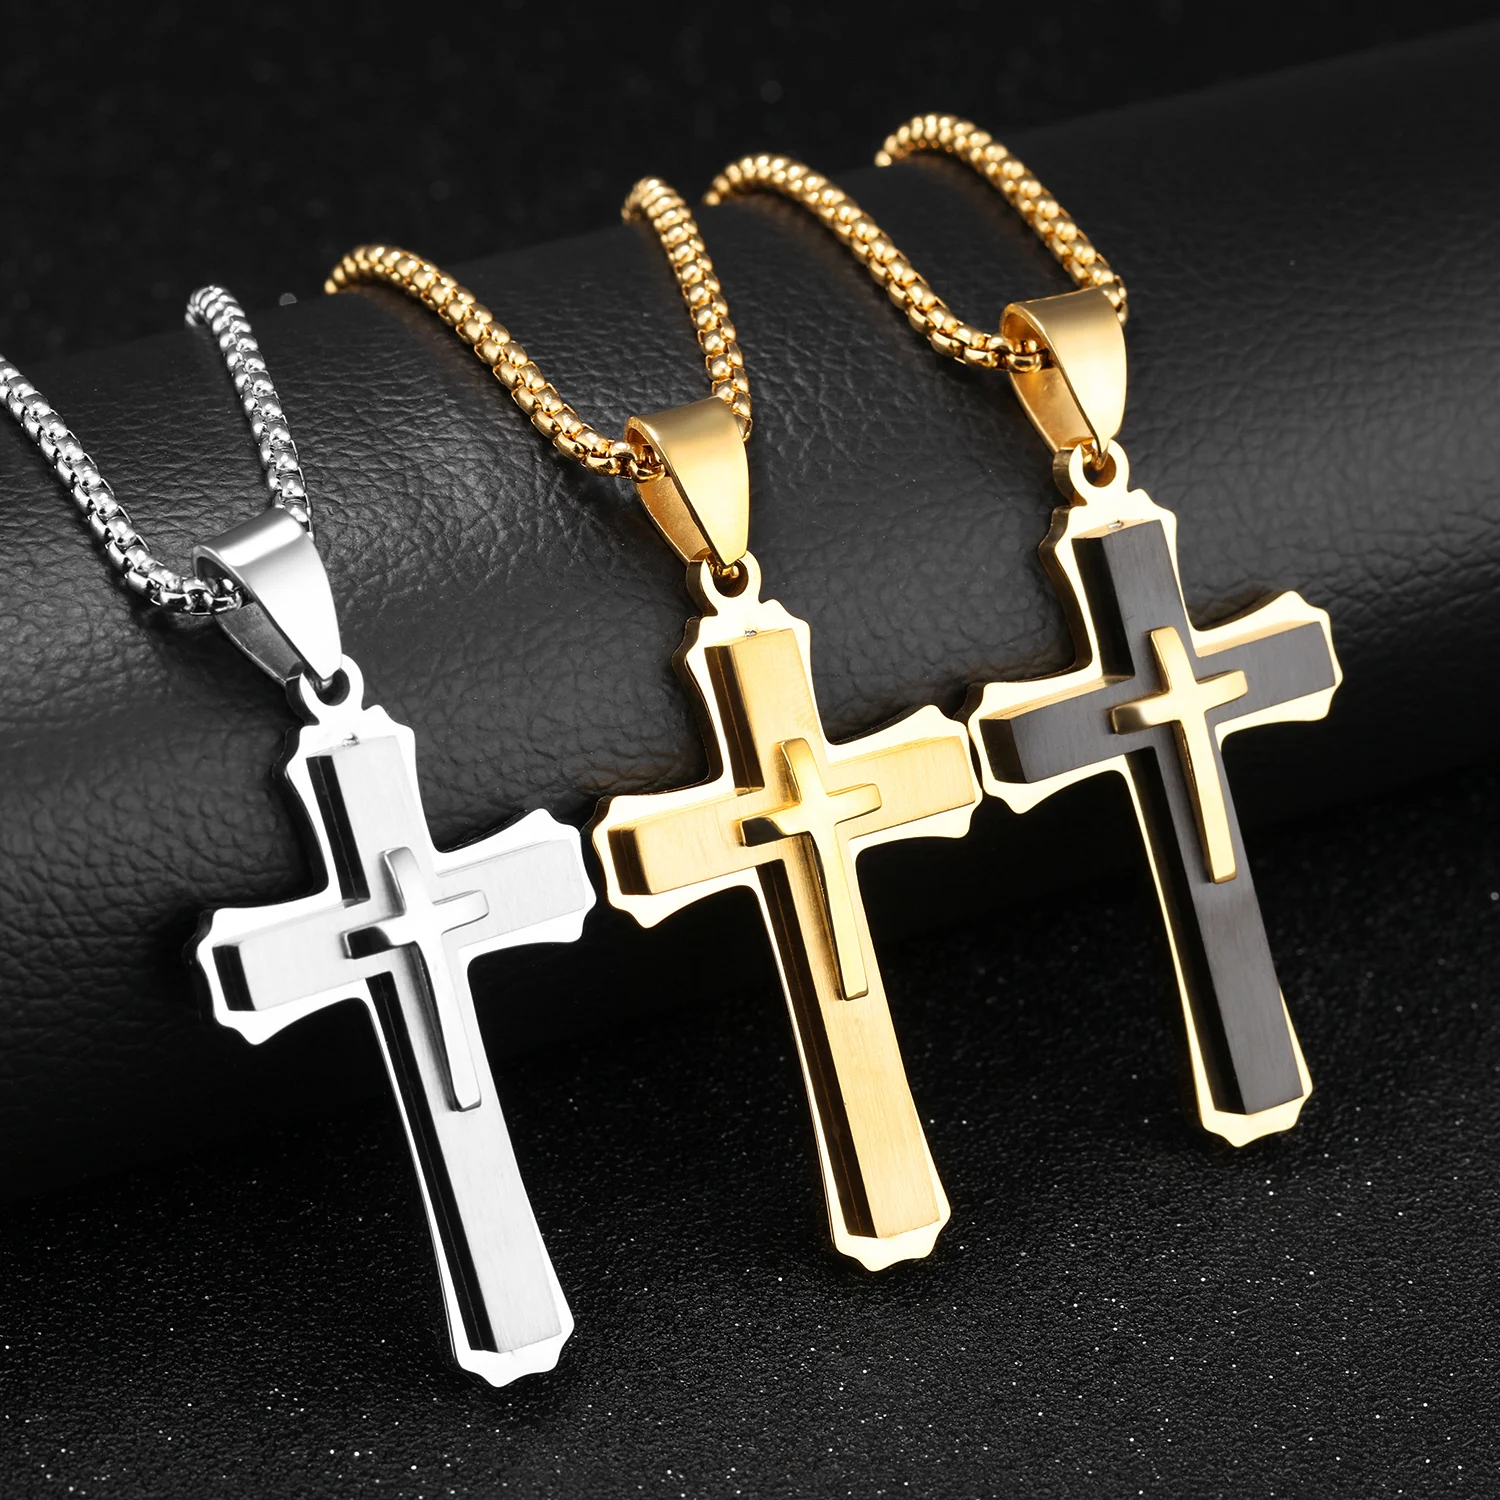 

Big Titanium Steel Cross Pendant Necklace for Men Teen Boys Jewelry Three Layers Jesus Cross Crucifix Necklaces with Box Chain, Silver, gold, black